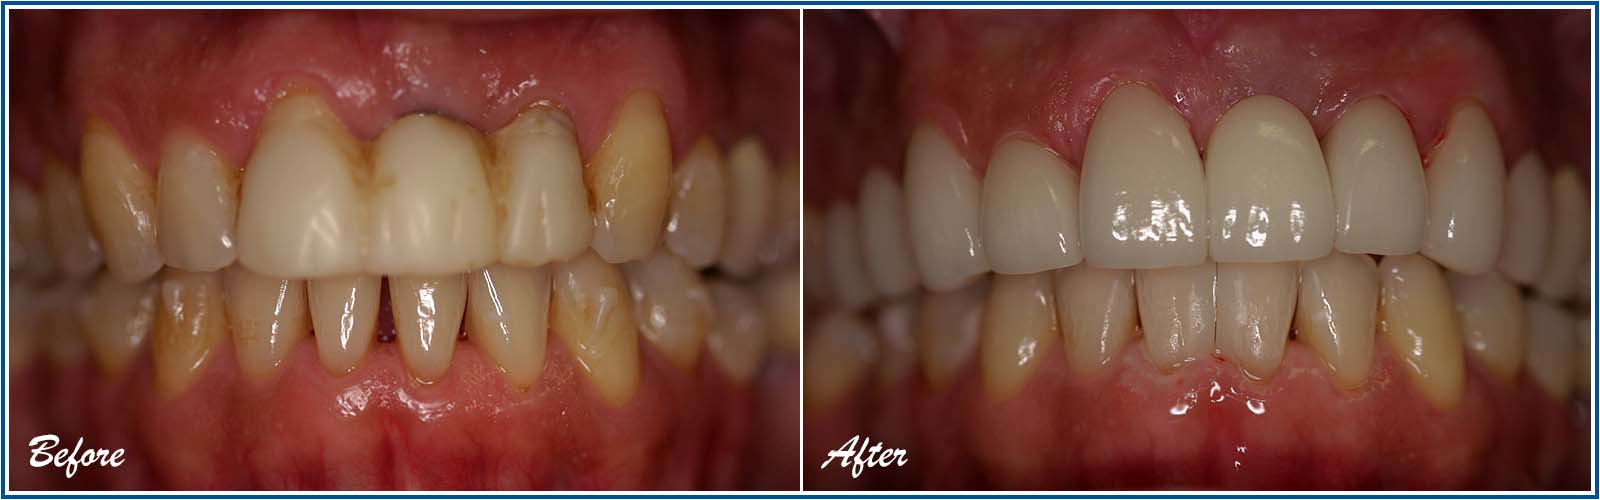 Porcelain Veneers Before and After